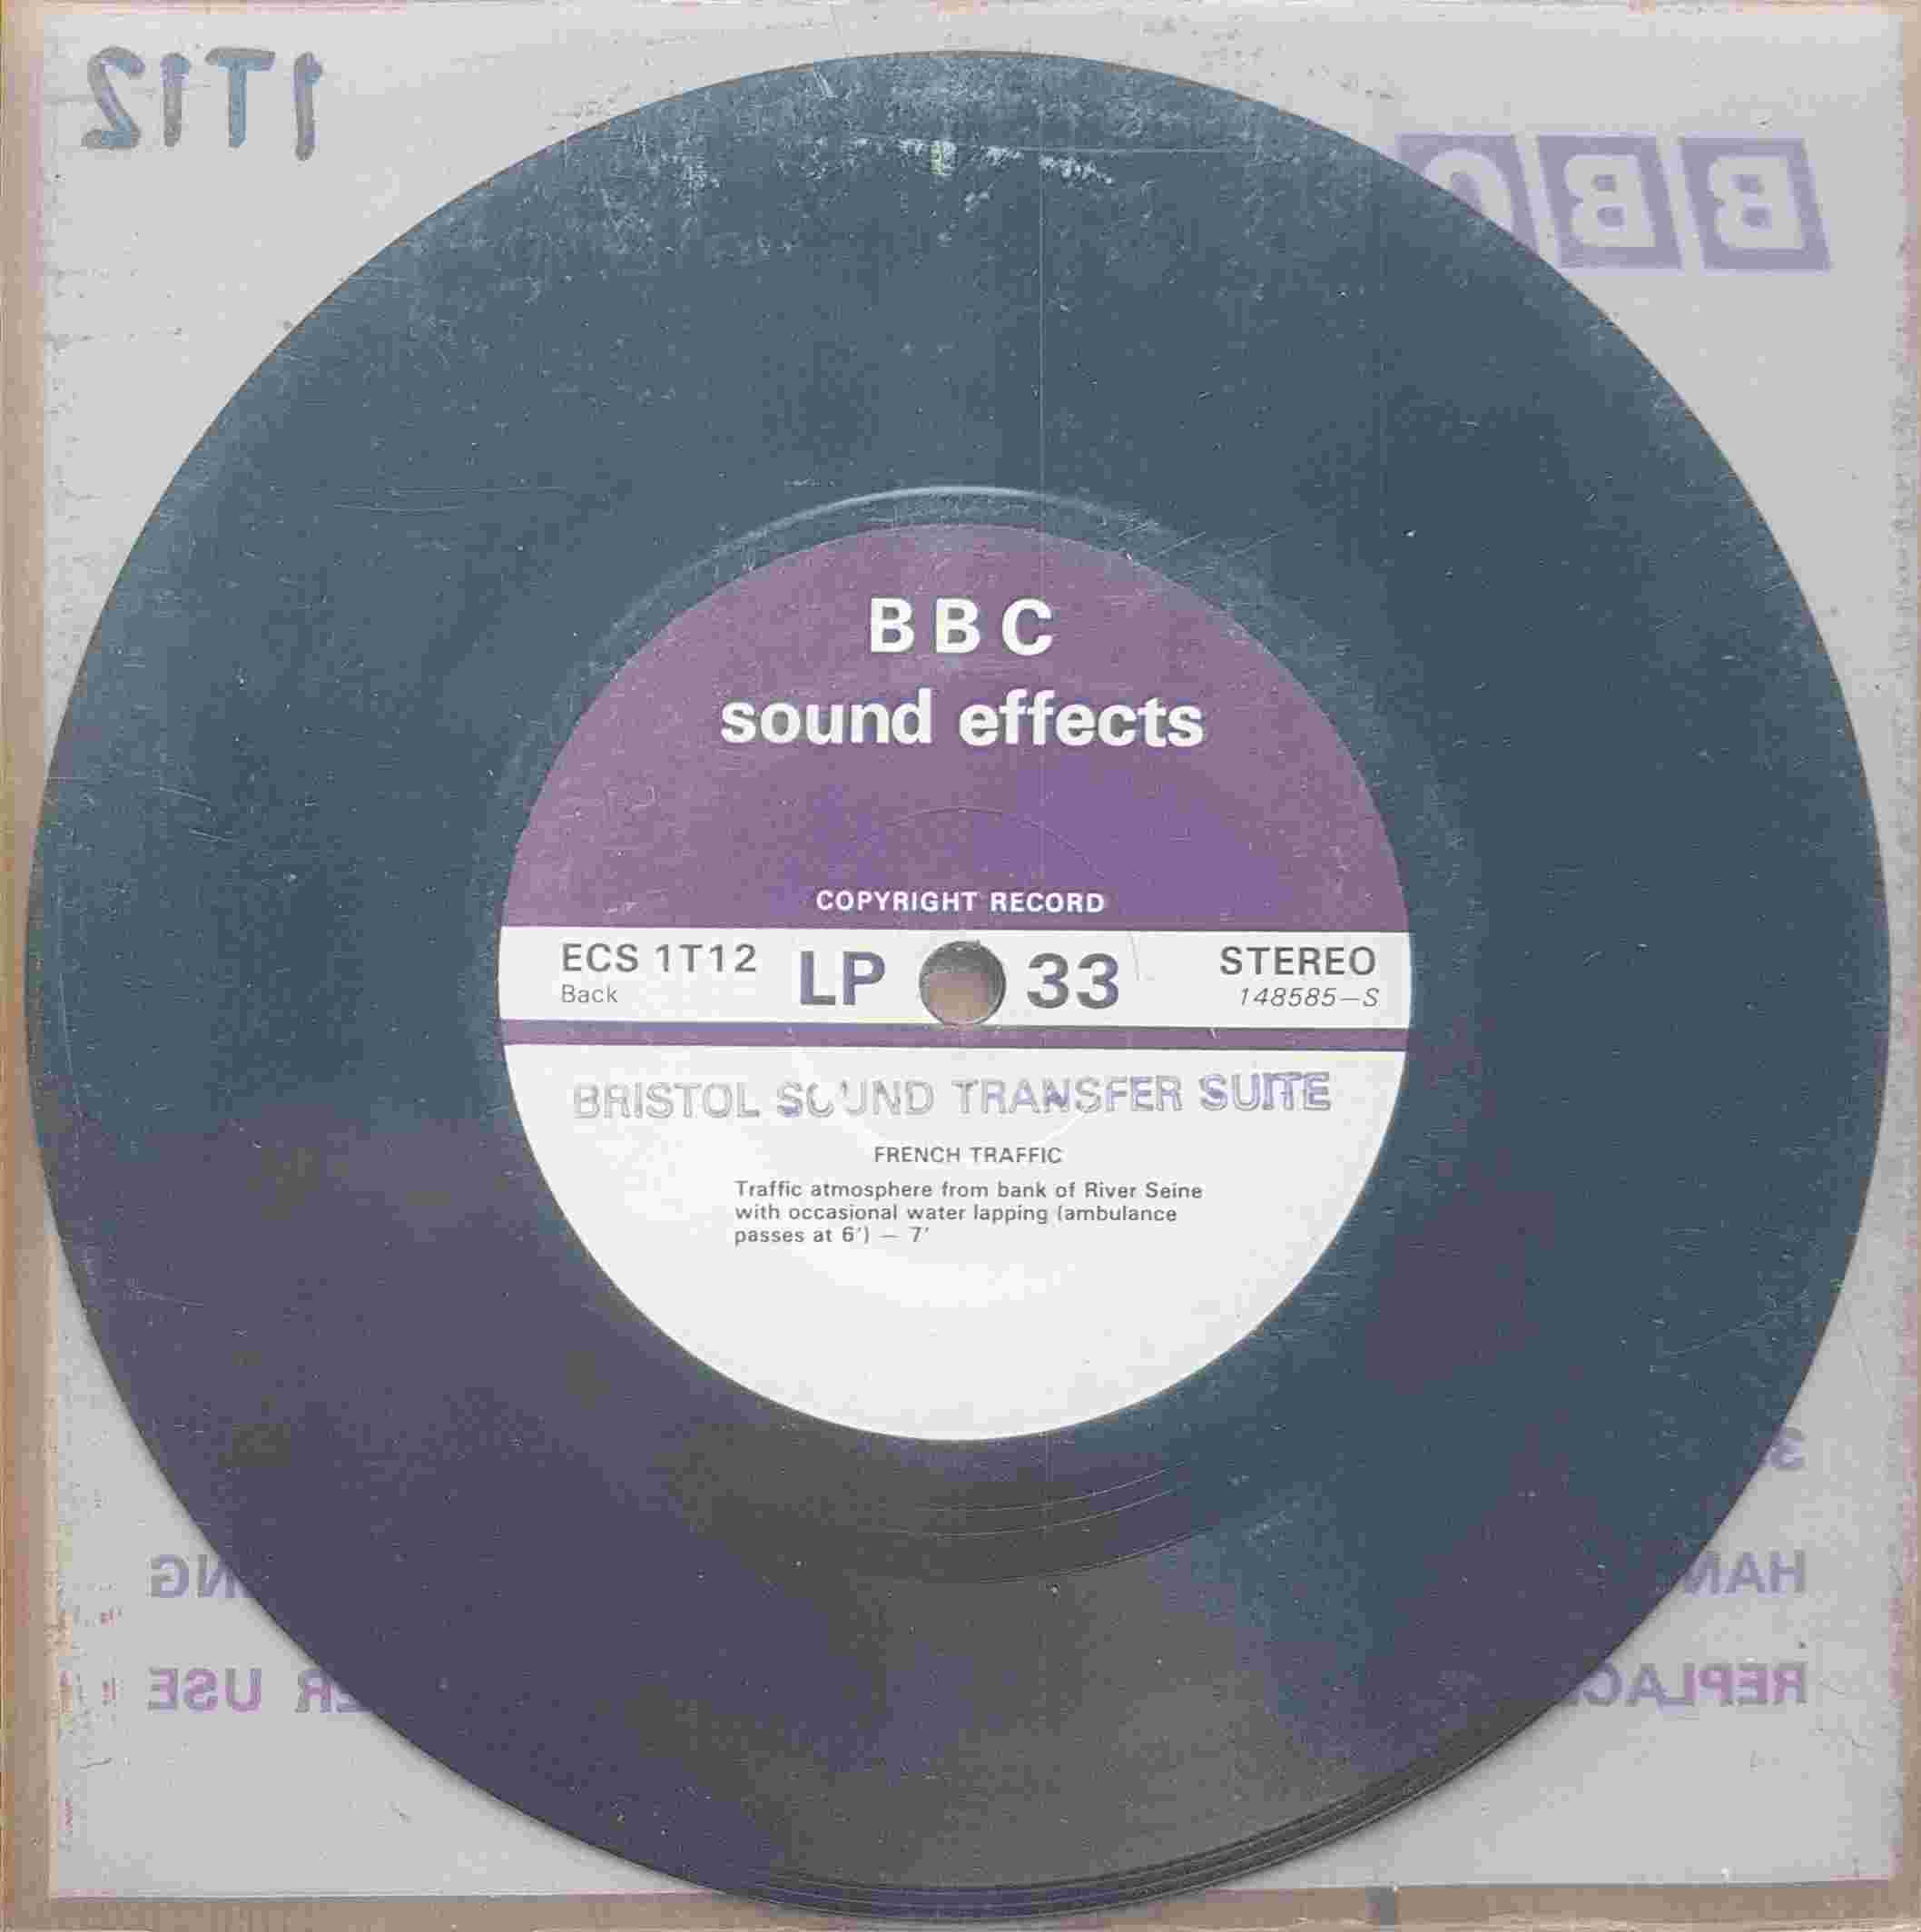 Picture of ECS 1T12 French traffic by artist Not registered from the BBC records and Tapes library